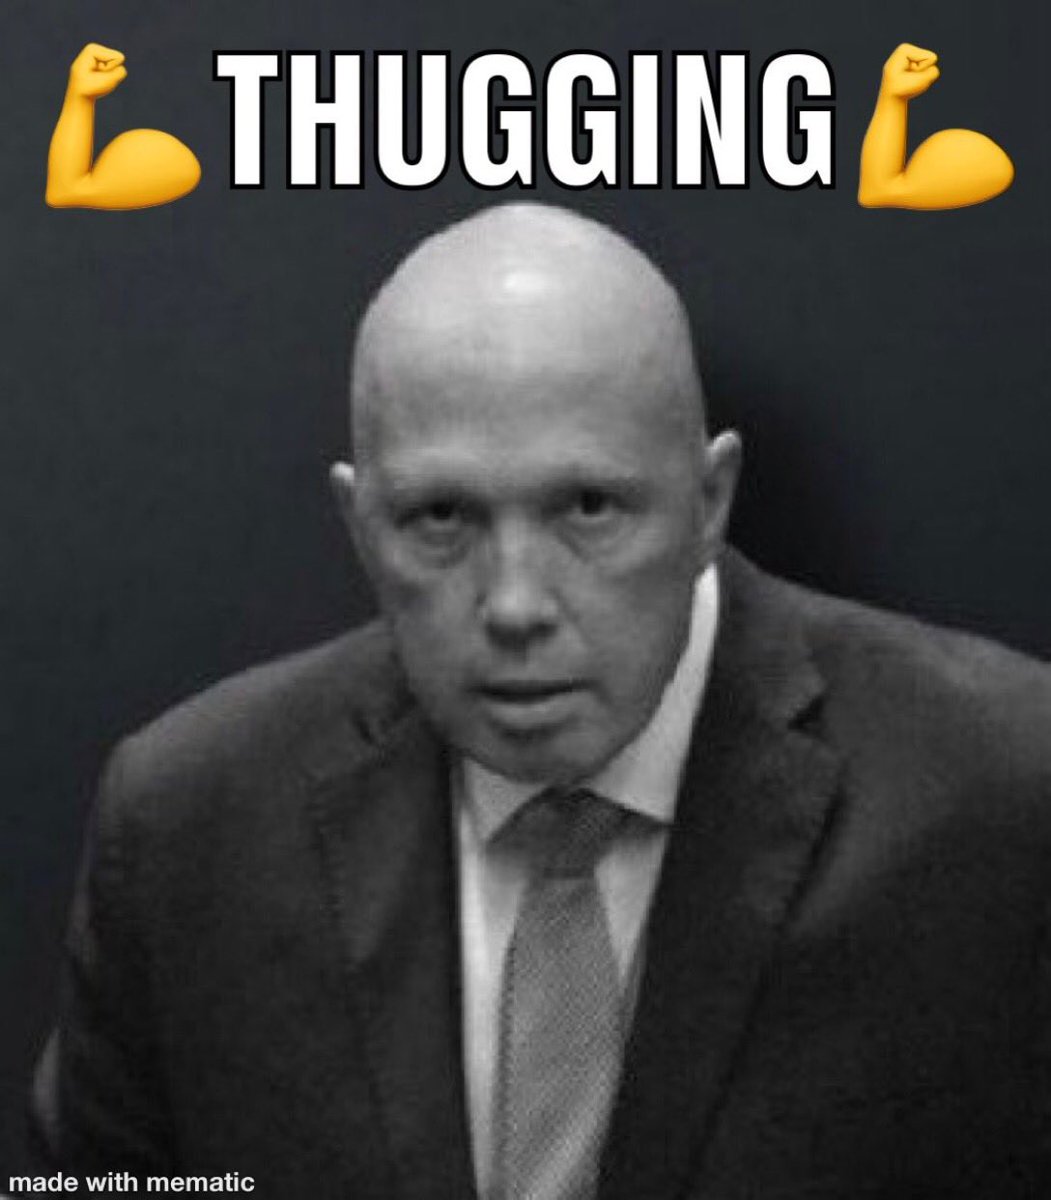 #Dutton & #LNPCorruptionParty have no policies or visions.They intend to  stand on margins of daily affairs, hoping for disaster & poor economic developments.
When #DuttonThug believes it necessary,he’ll co-ordinate media proxeys to mimic his overblown response.

#auspol #LNPfail